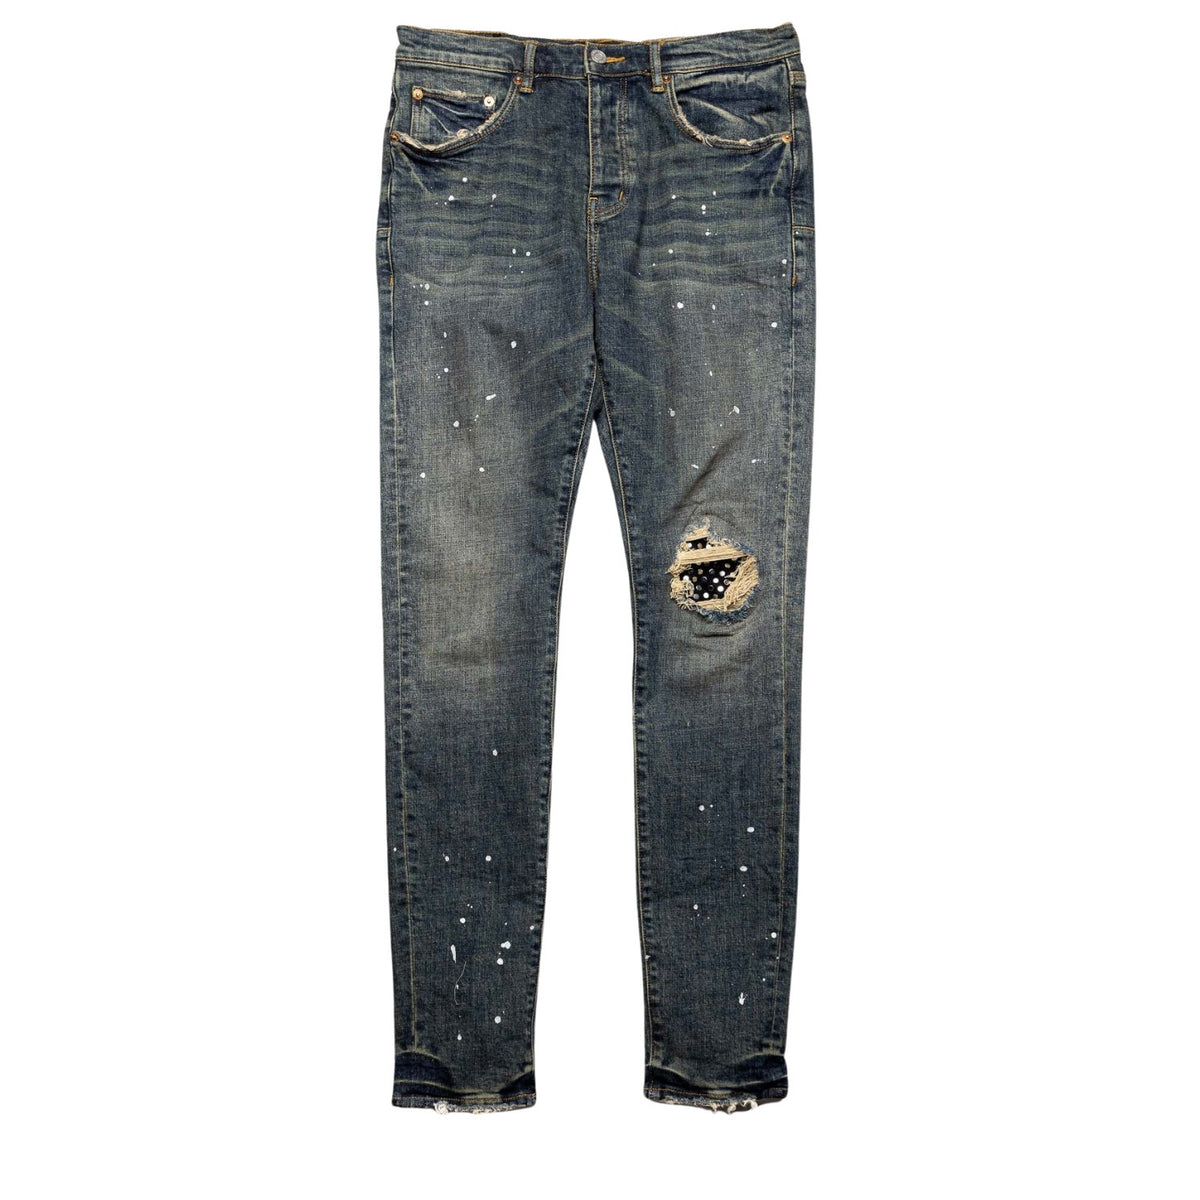 Purple-brand Distressed Dirty Jeans Mens Style : P002-ddgb222